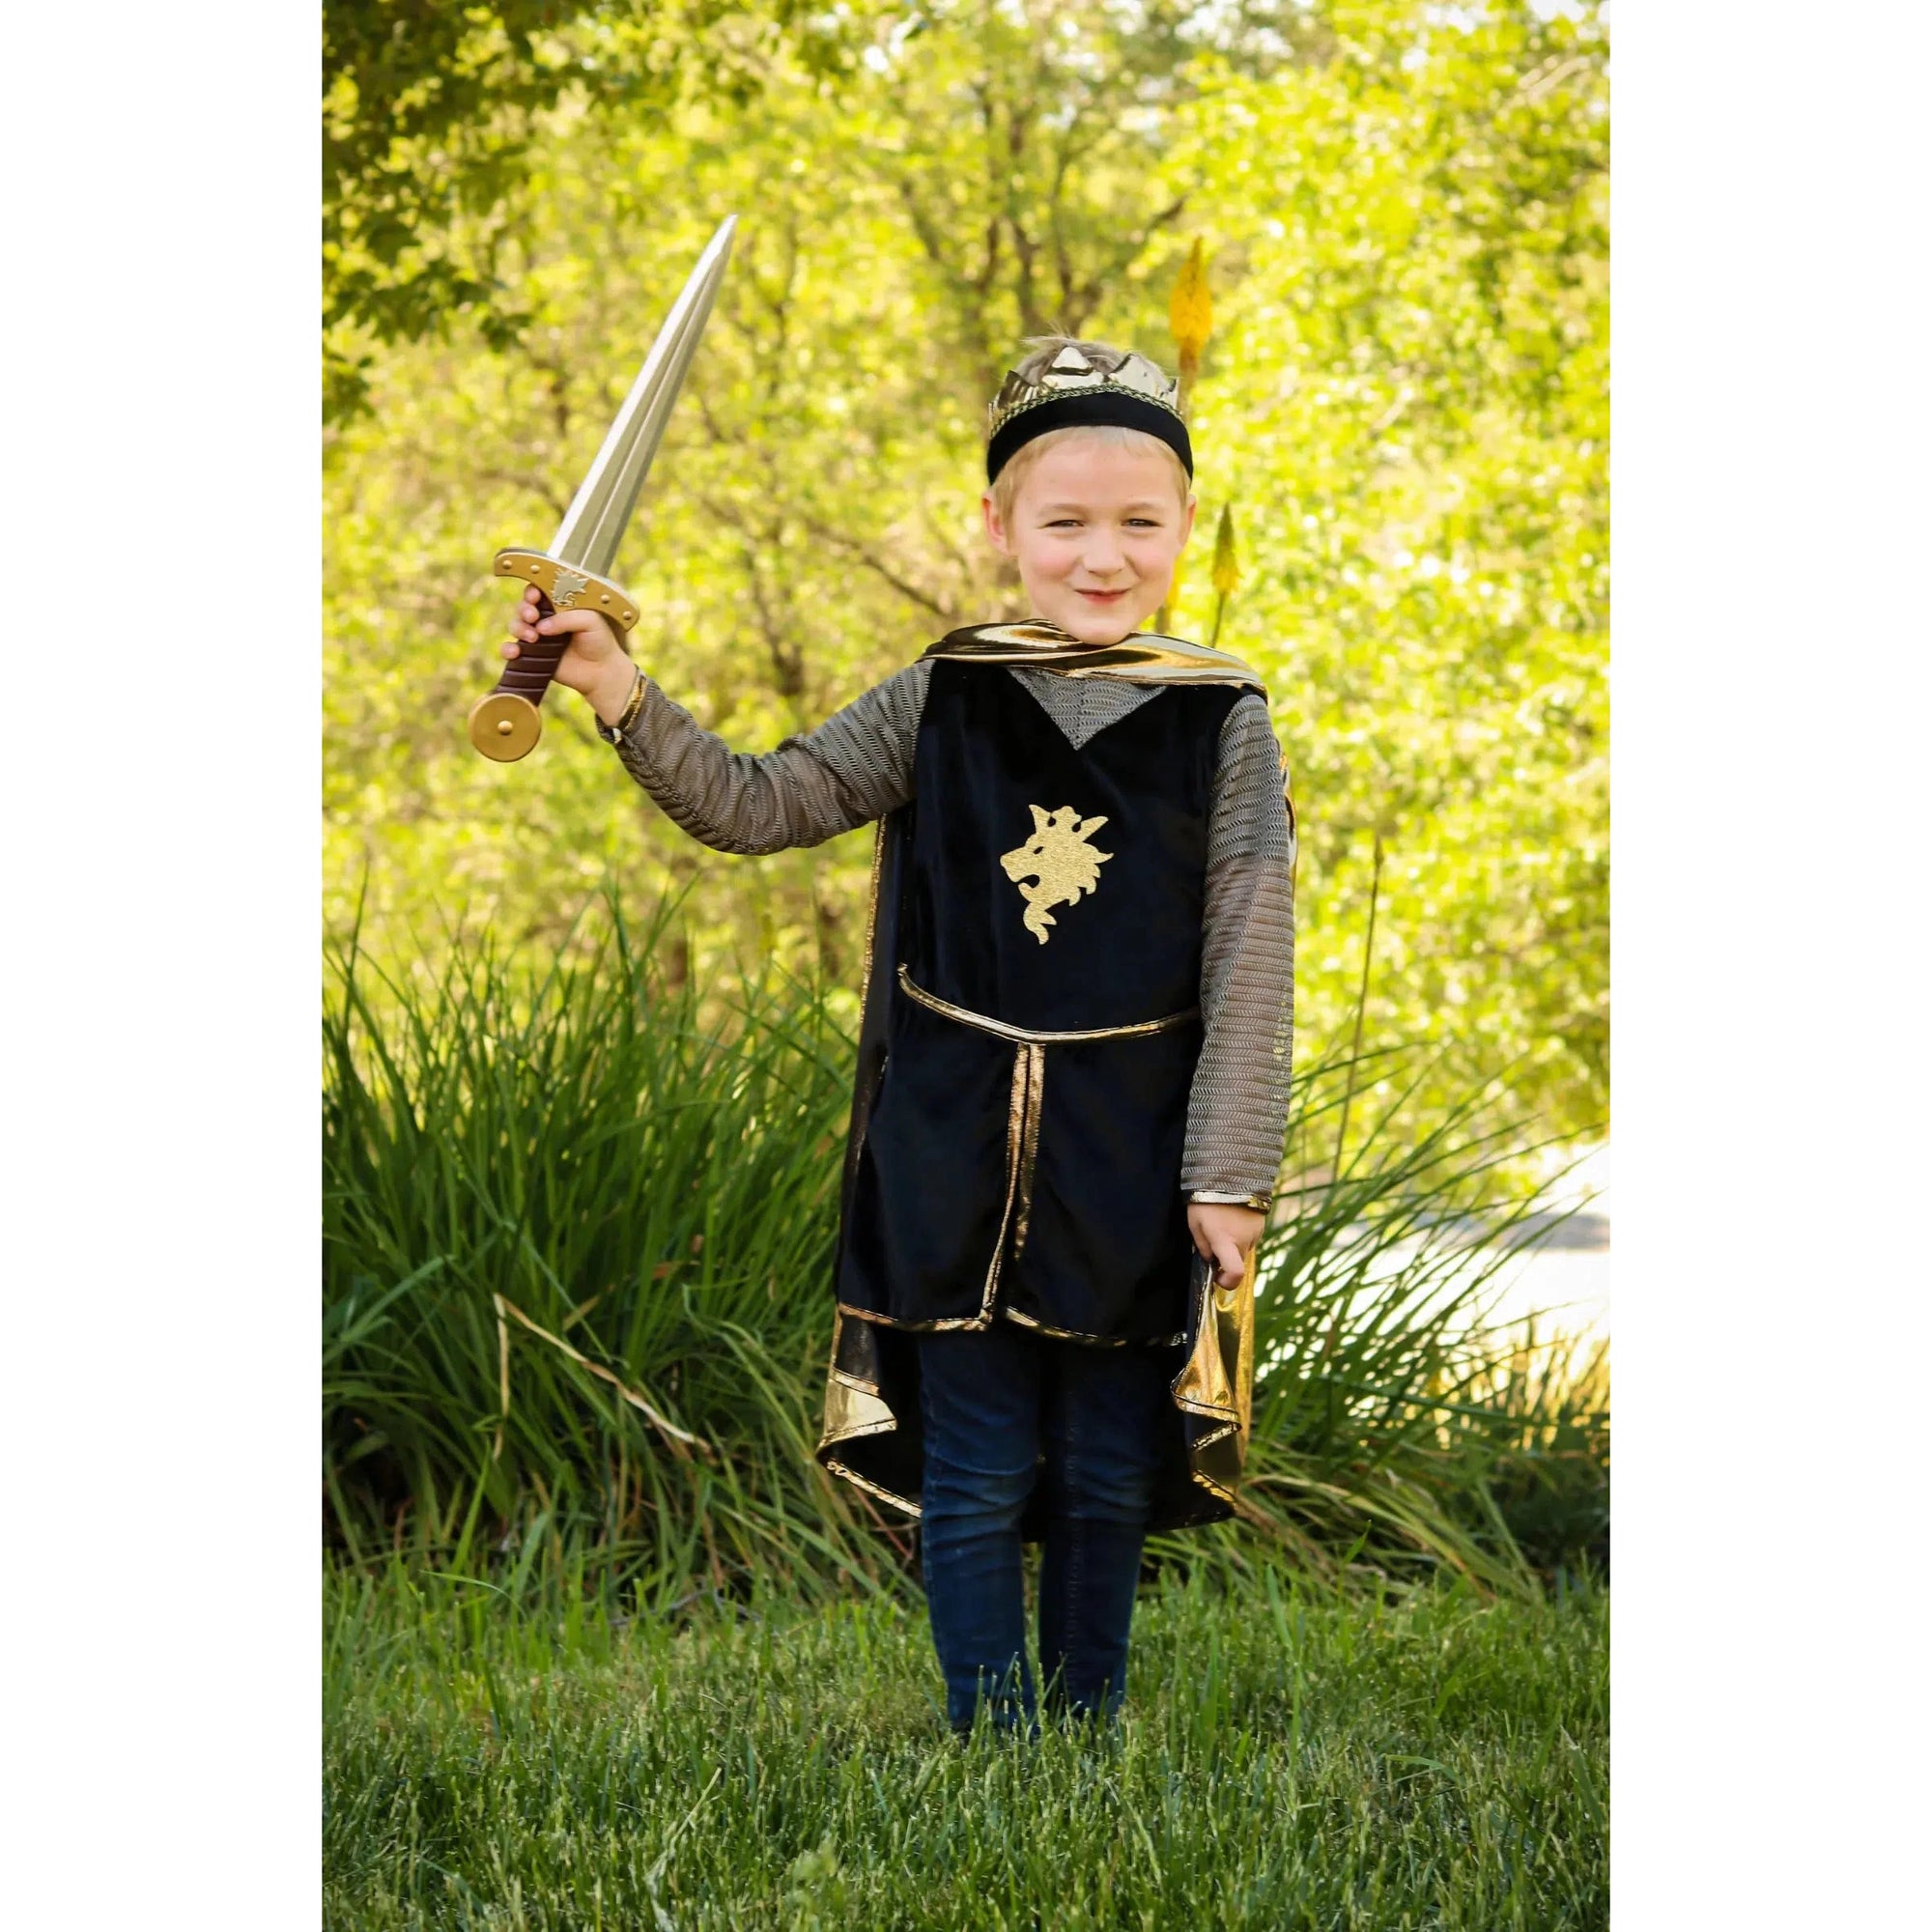 Smiling child holding up a sword in his right hand, with the whole knight ensemble with the tunic, cape and crown.